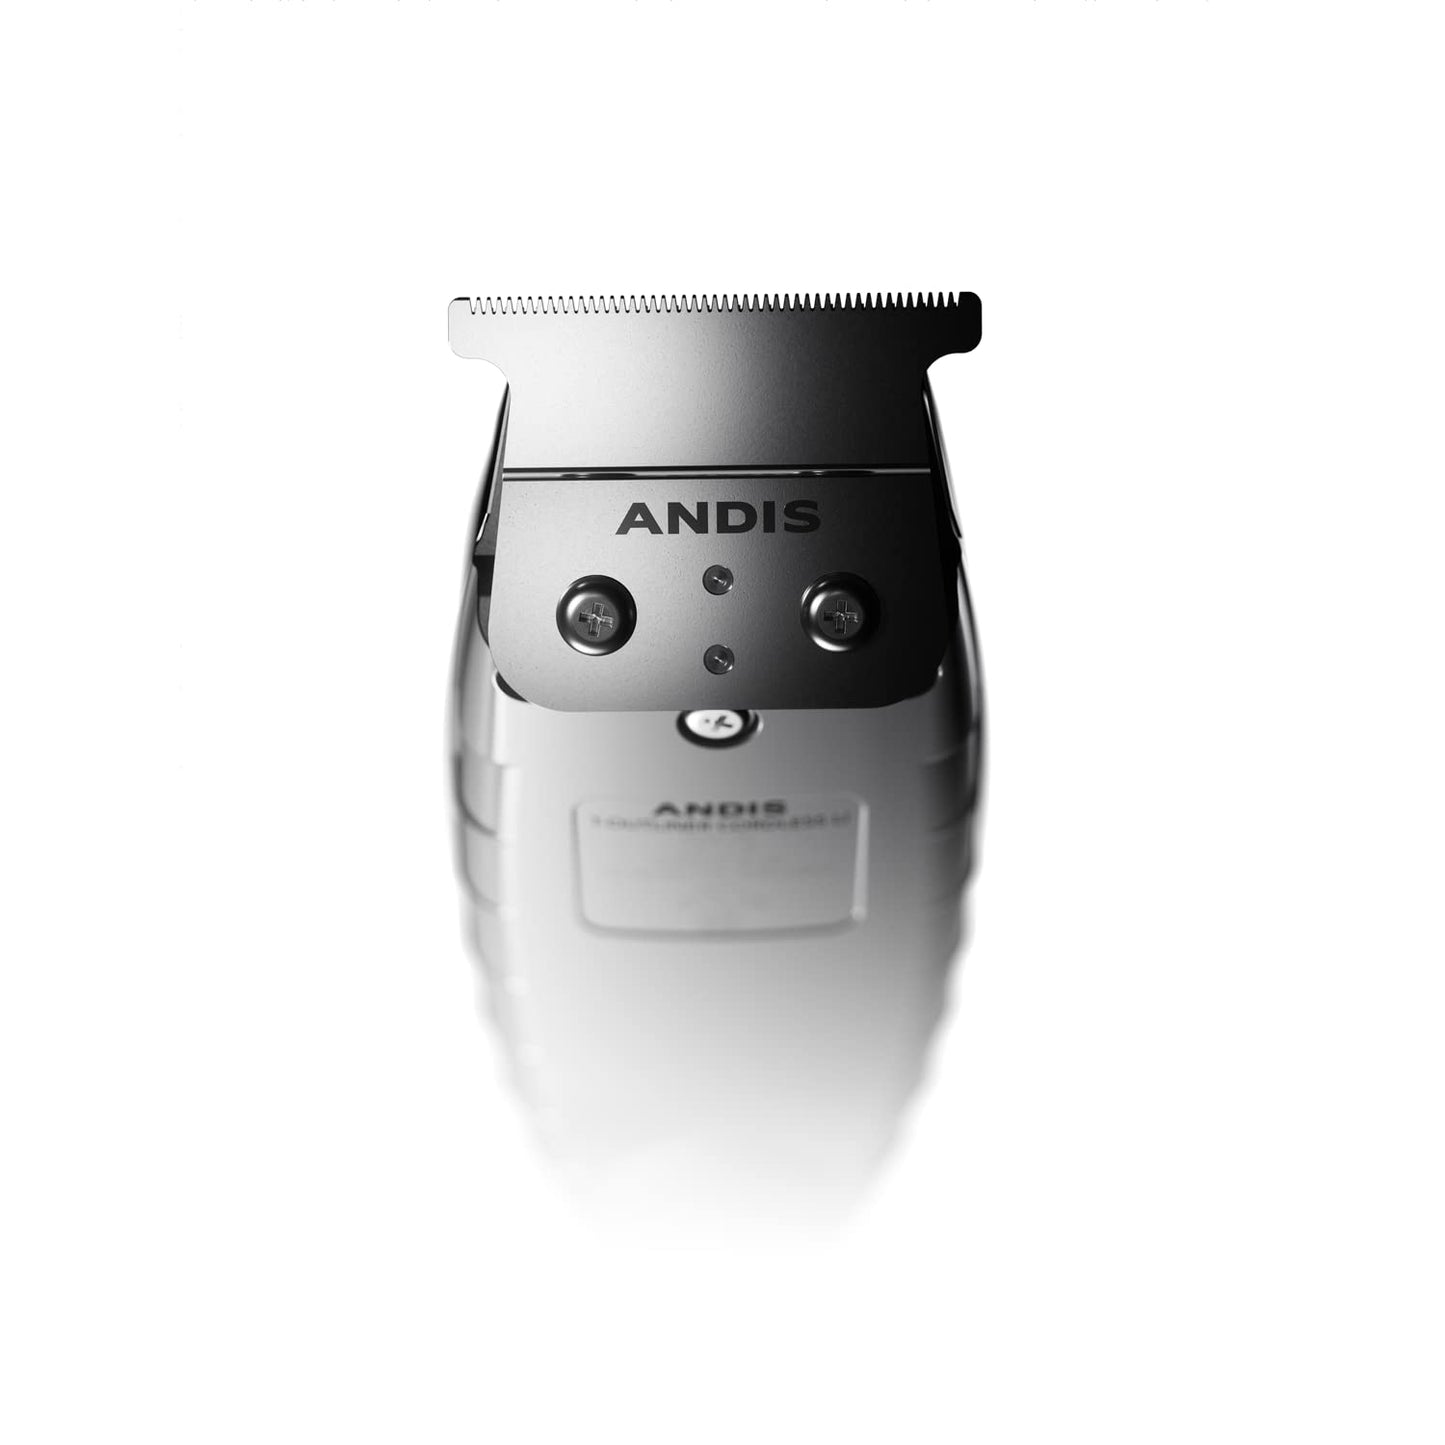 Andis 74055 Professional Corded/Cordless Hair & Beard Trimmer, Zero Gapped, Close Cutting Carbon Steel T-Outliner Blade, Grey